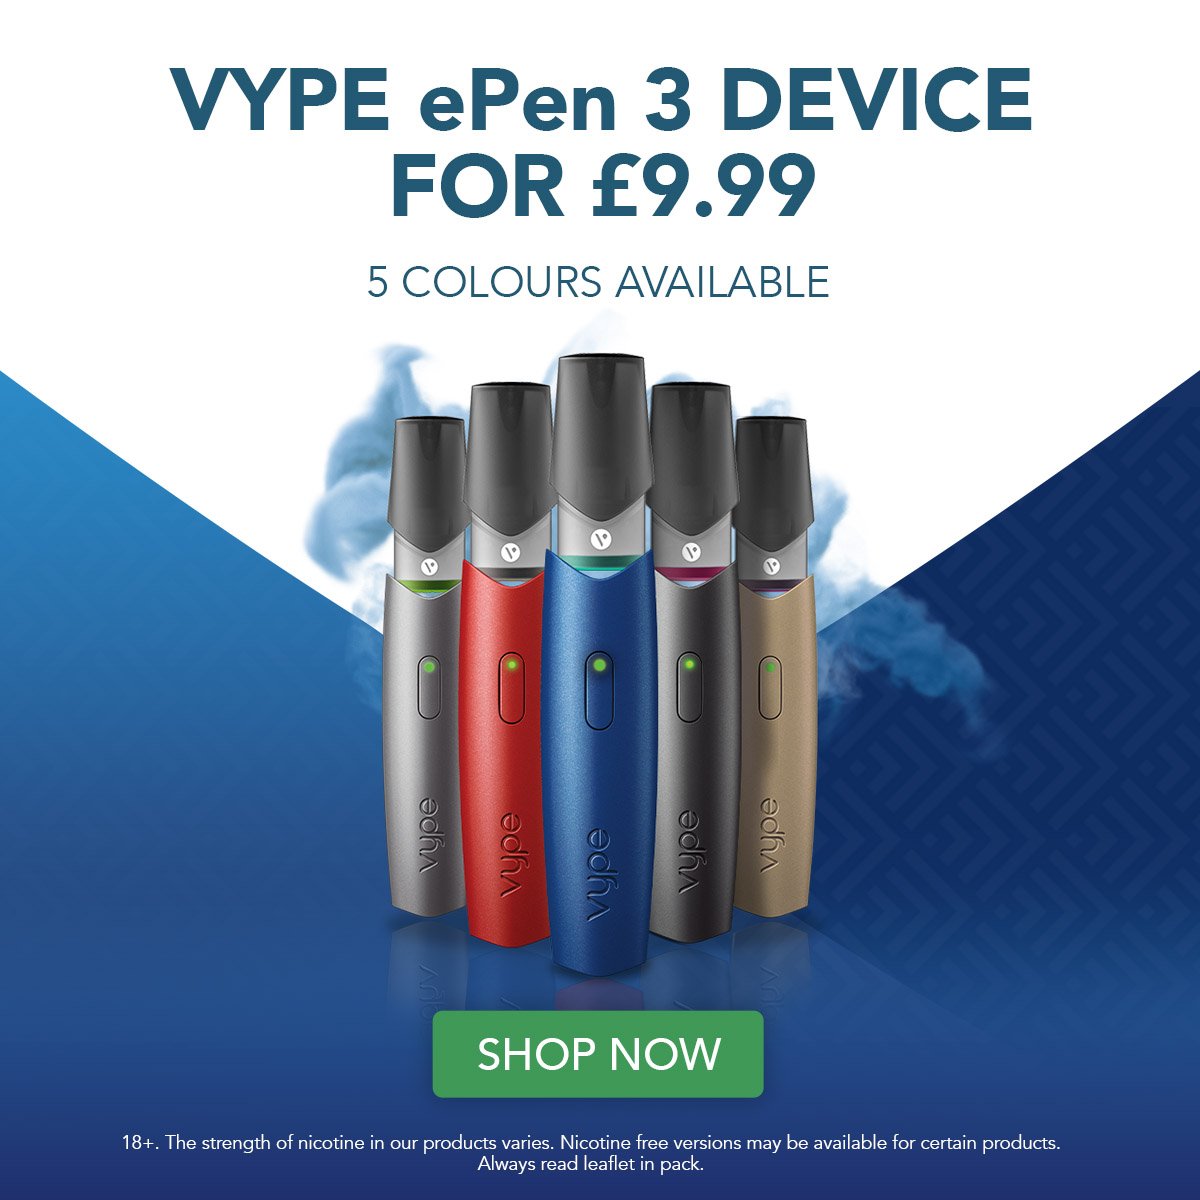 Vip Electronic Cigarette Vype Epen 3 Kits For 9 99 Milled